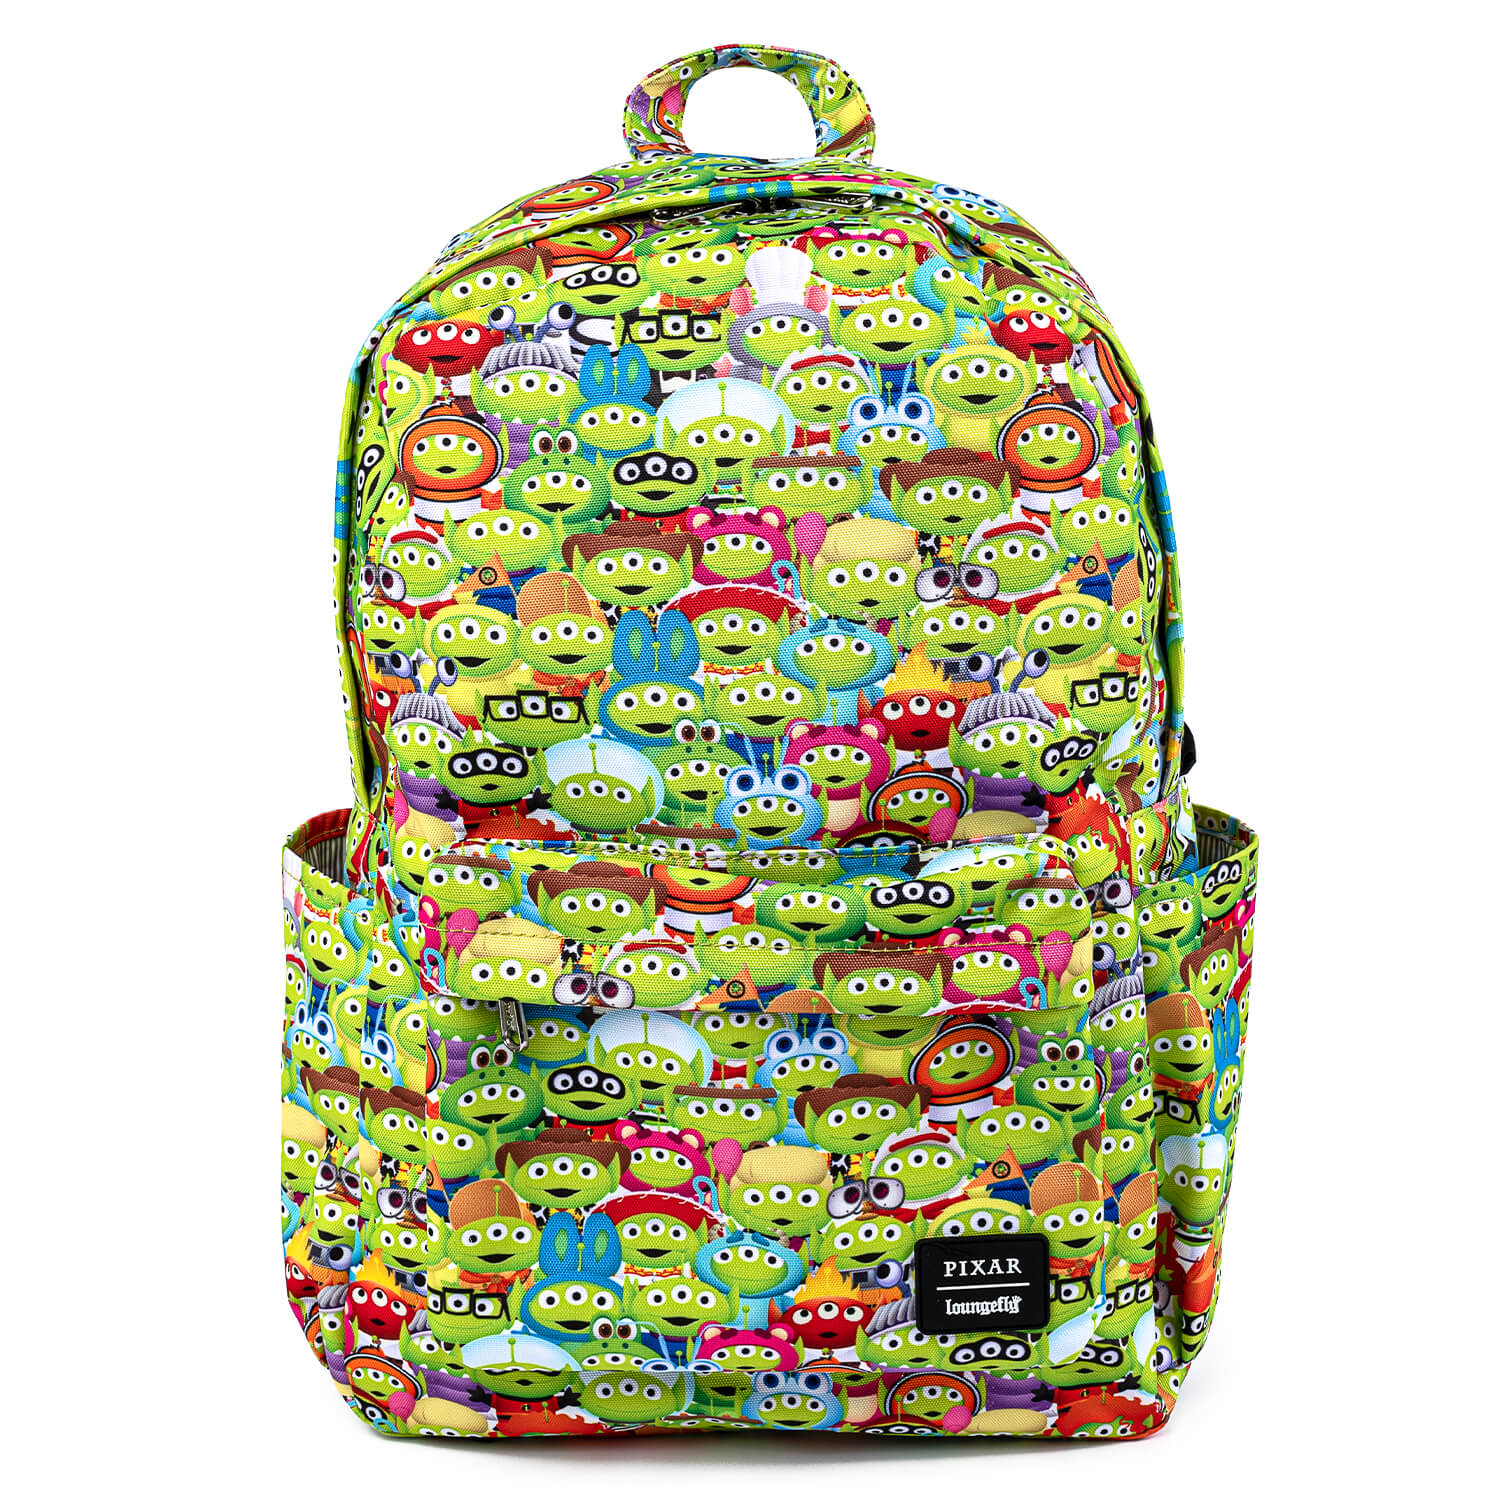 Loungefly Disney Pixar Toy Story Alien Outfits Aop Nylon Backpack